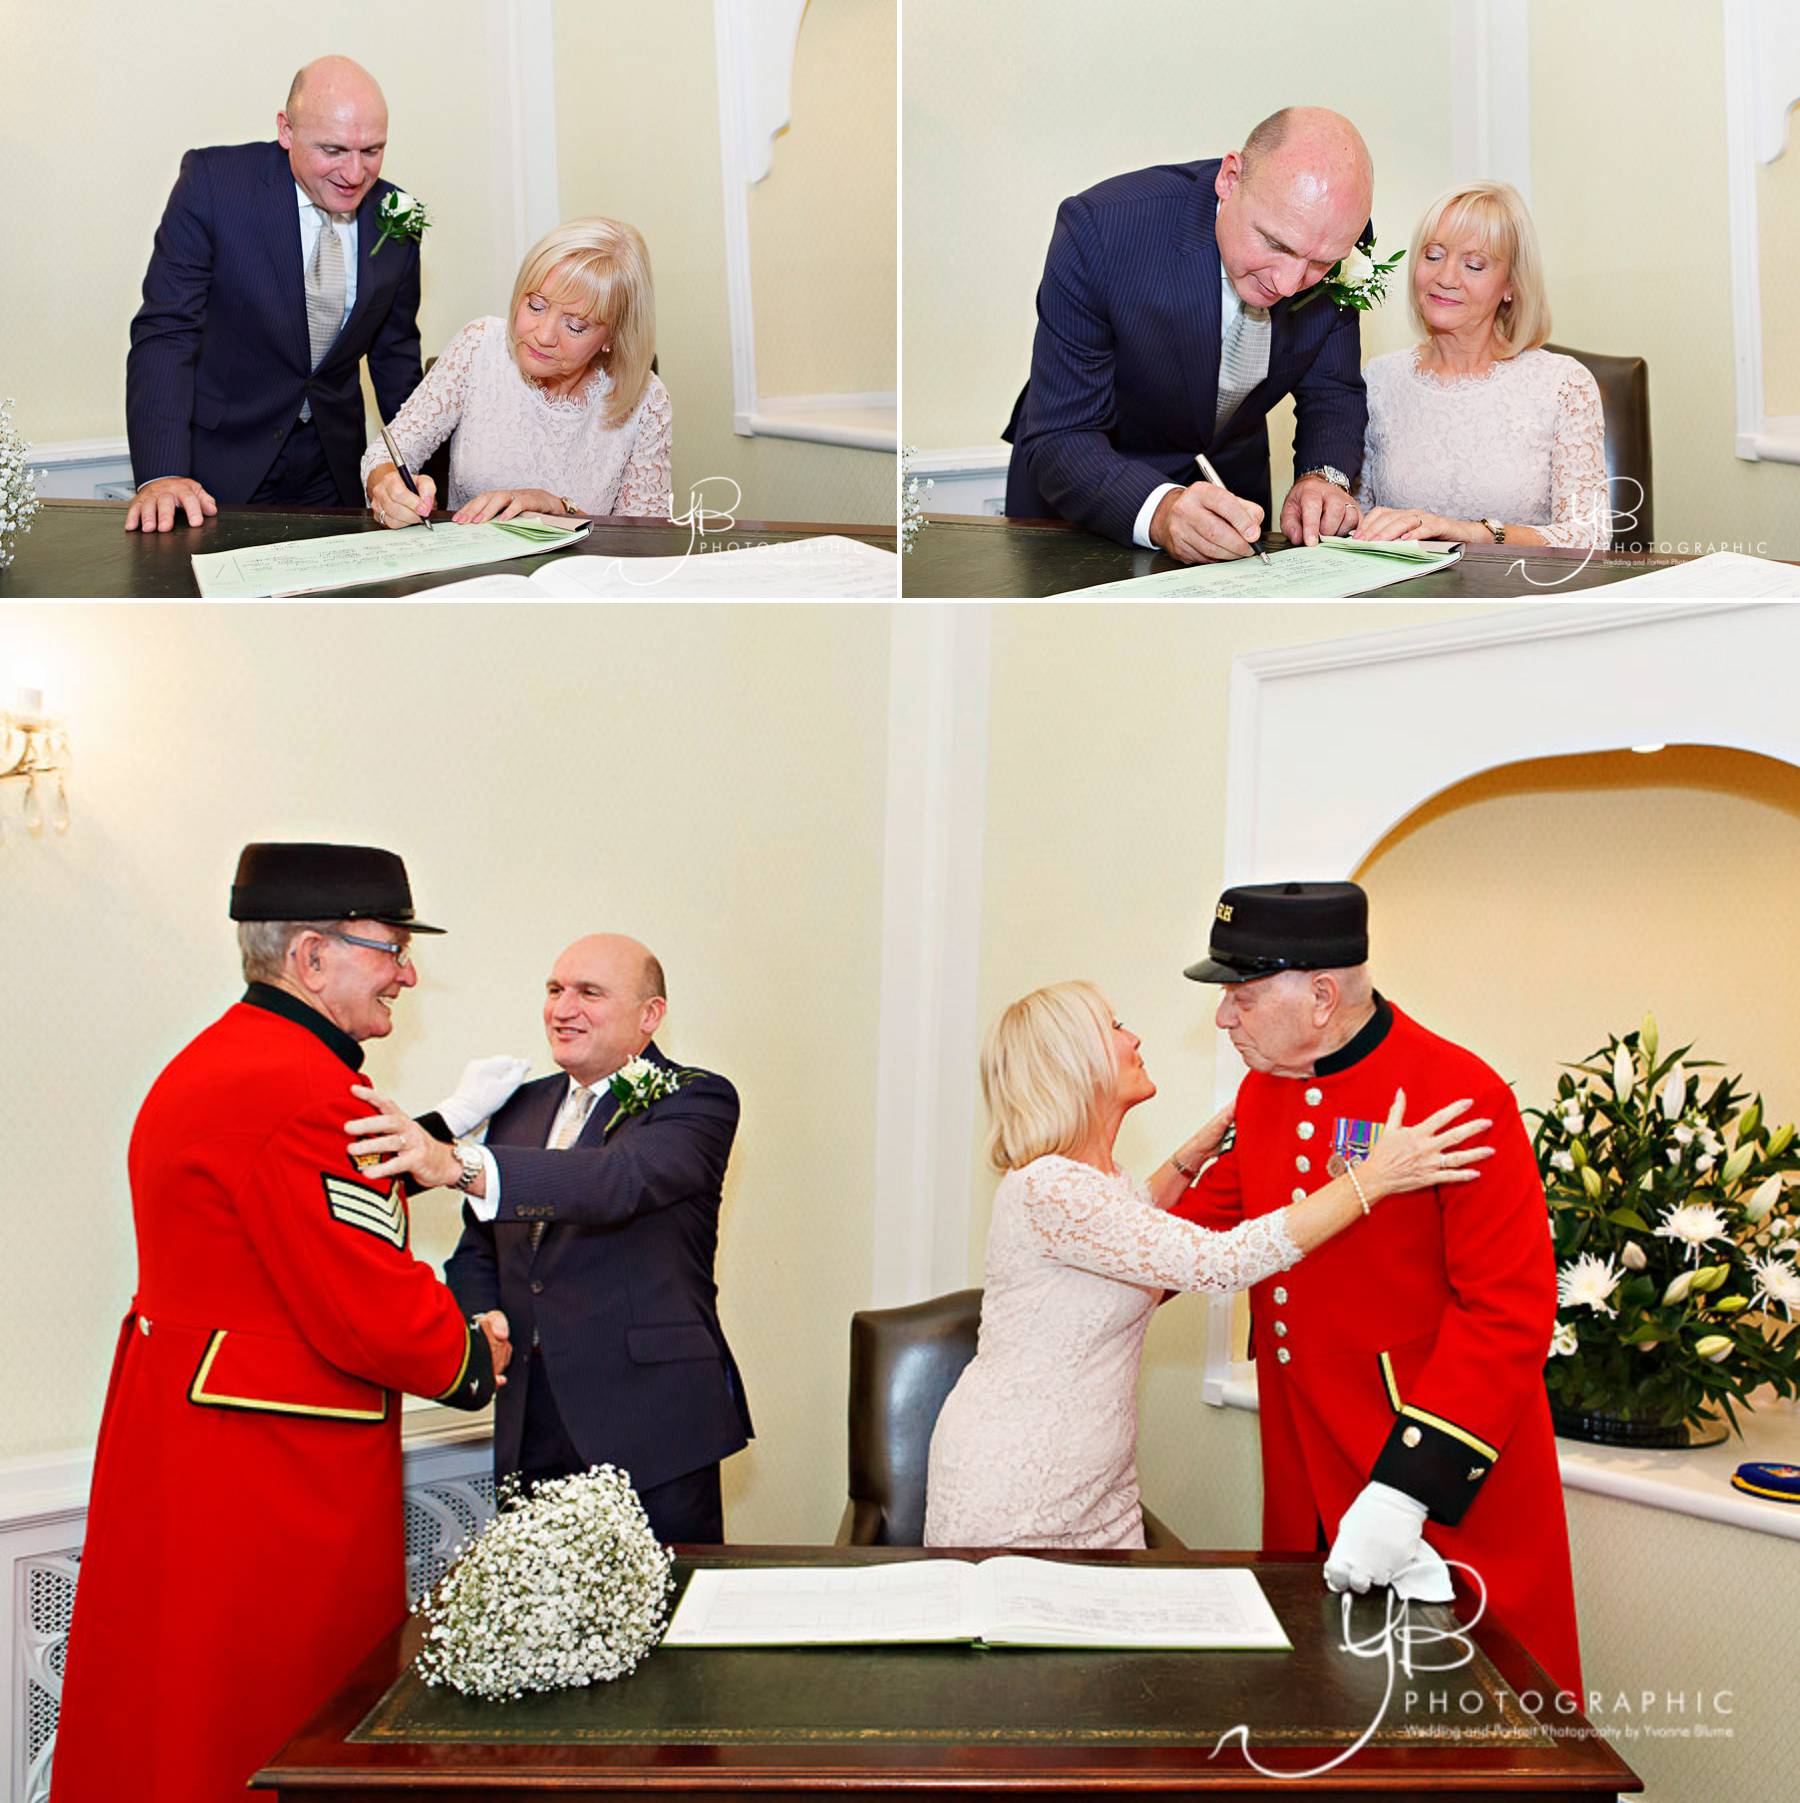 Two stylish Chelsea Pensioners can be your wedding witnesses or elopement witnesses, signing the register and throwing confetti, should you want that on the Kings Road steps. 